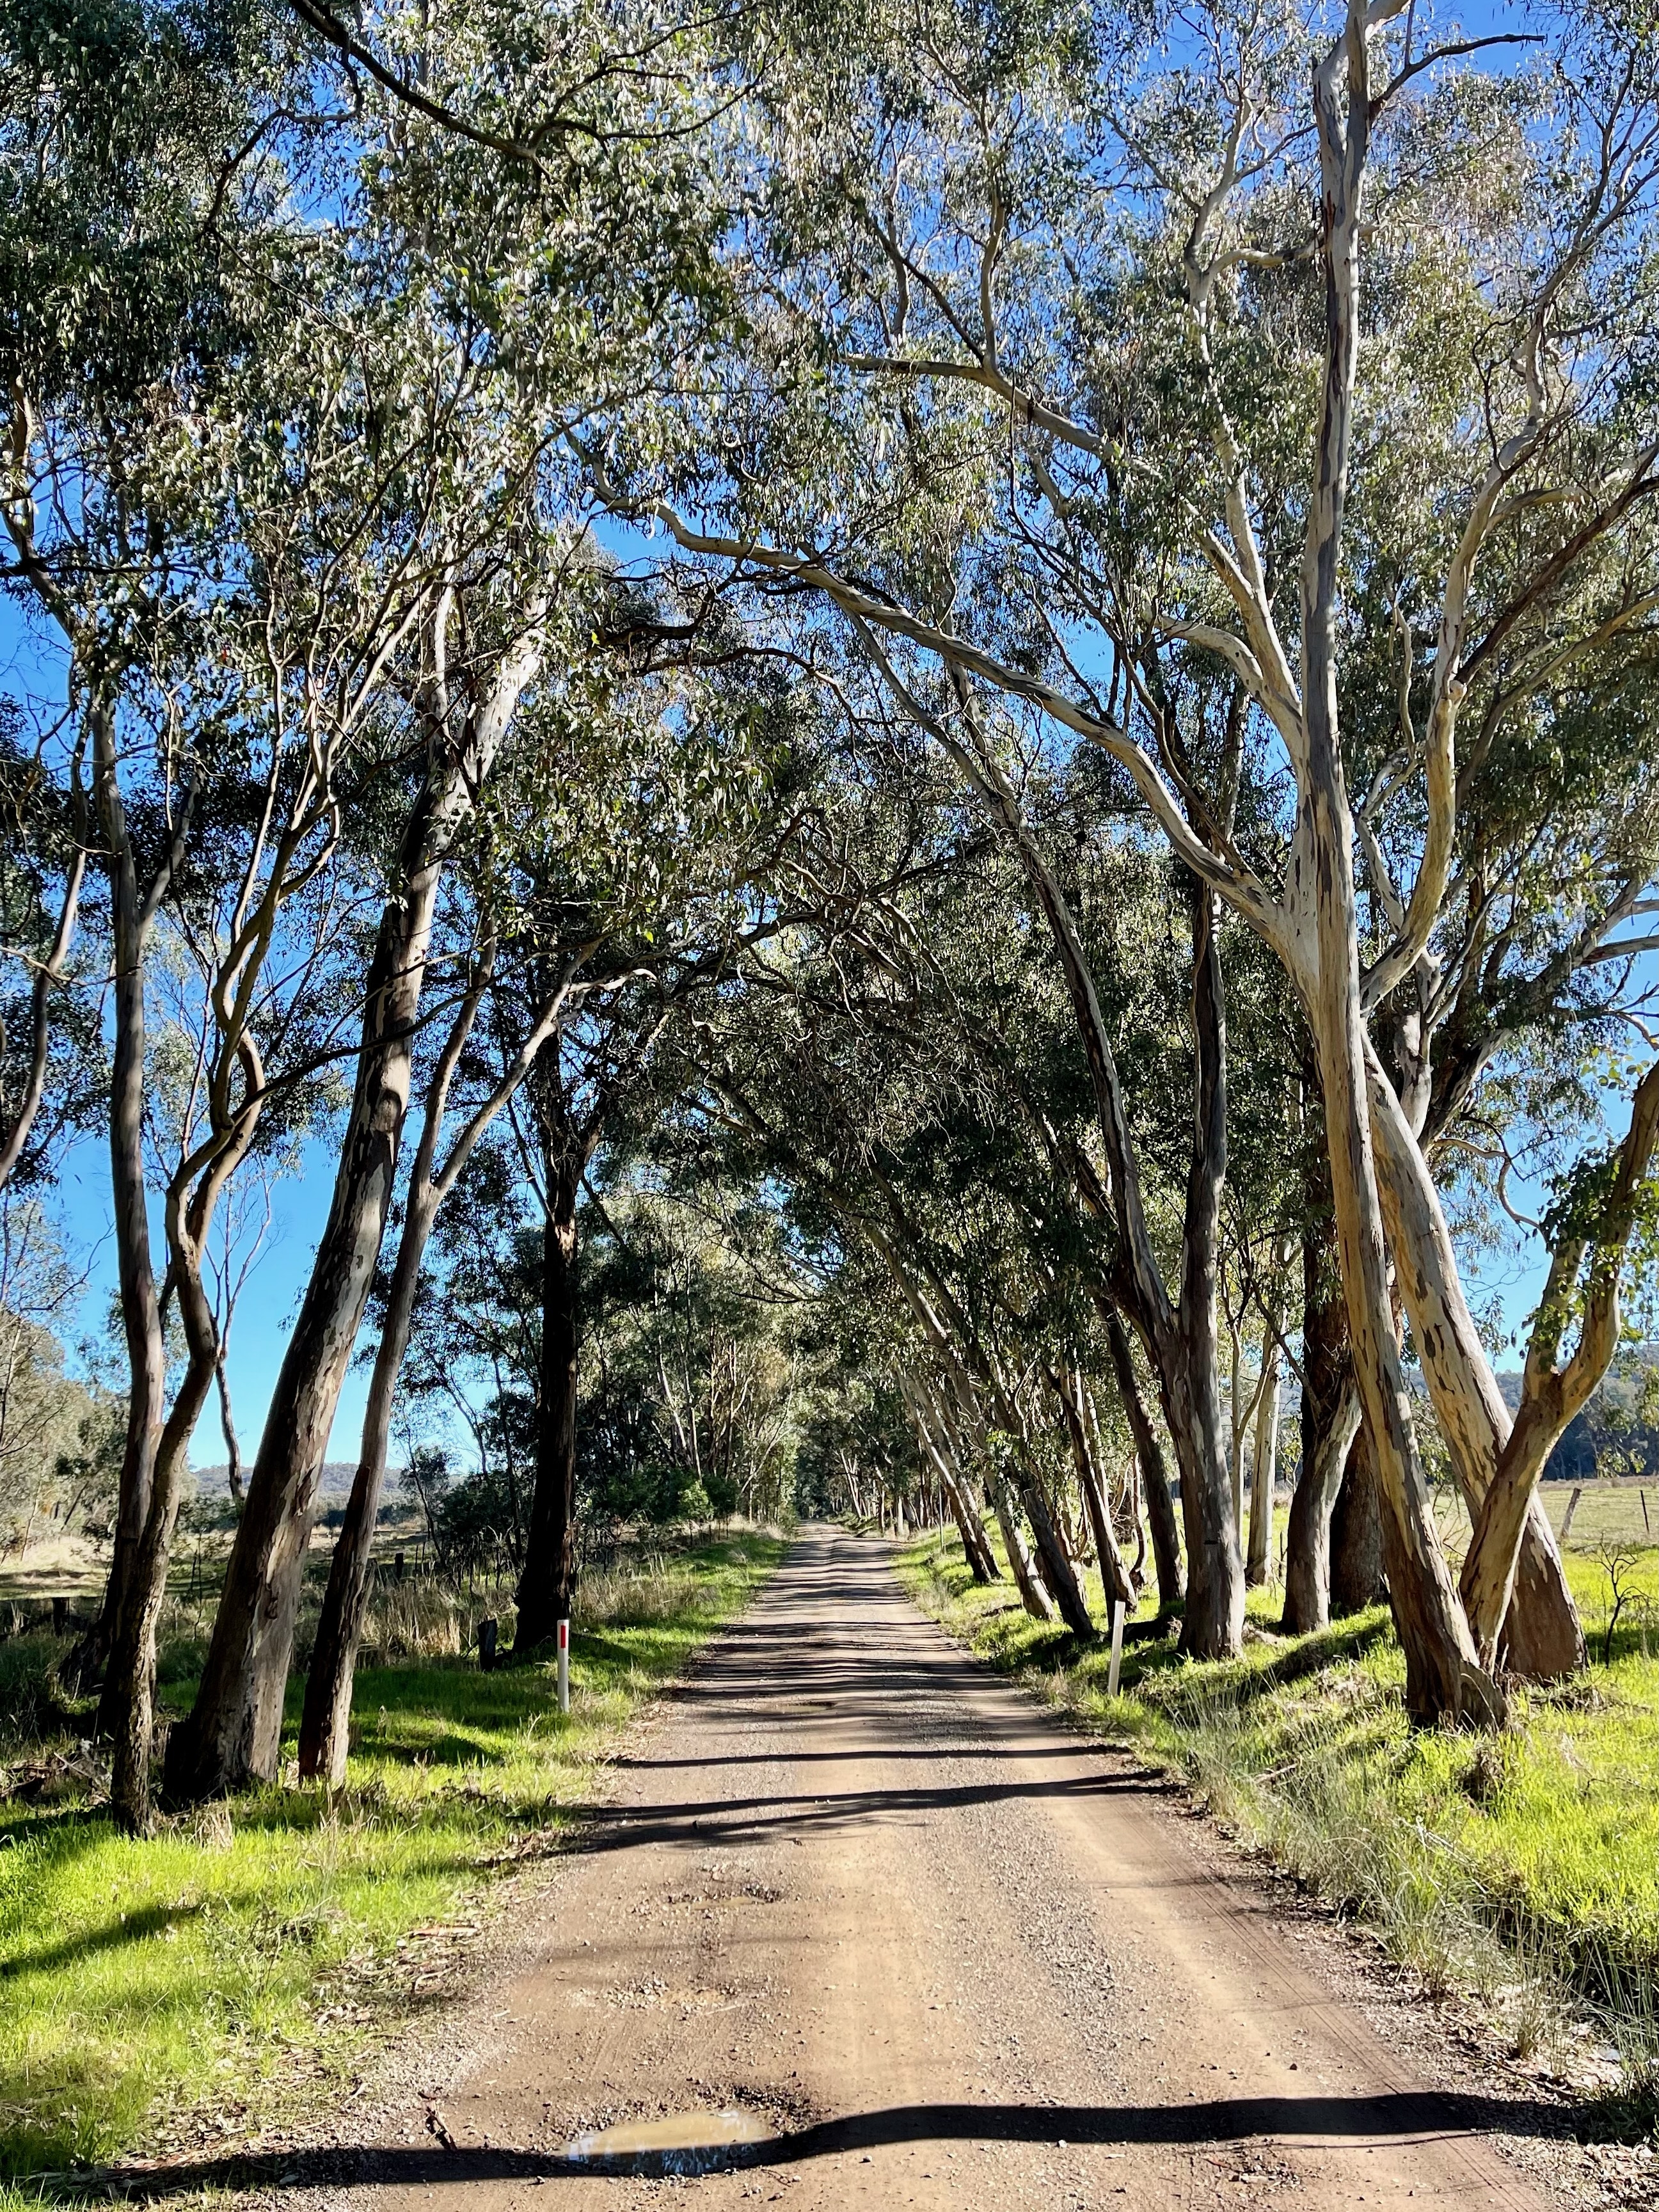 A smooth gravel road that is lined with native trees providing shade over the road on a sunny day